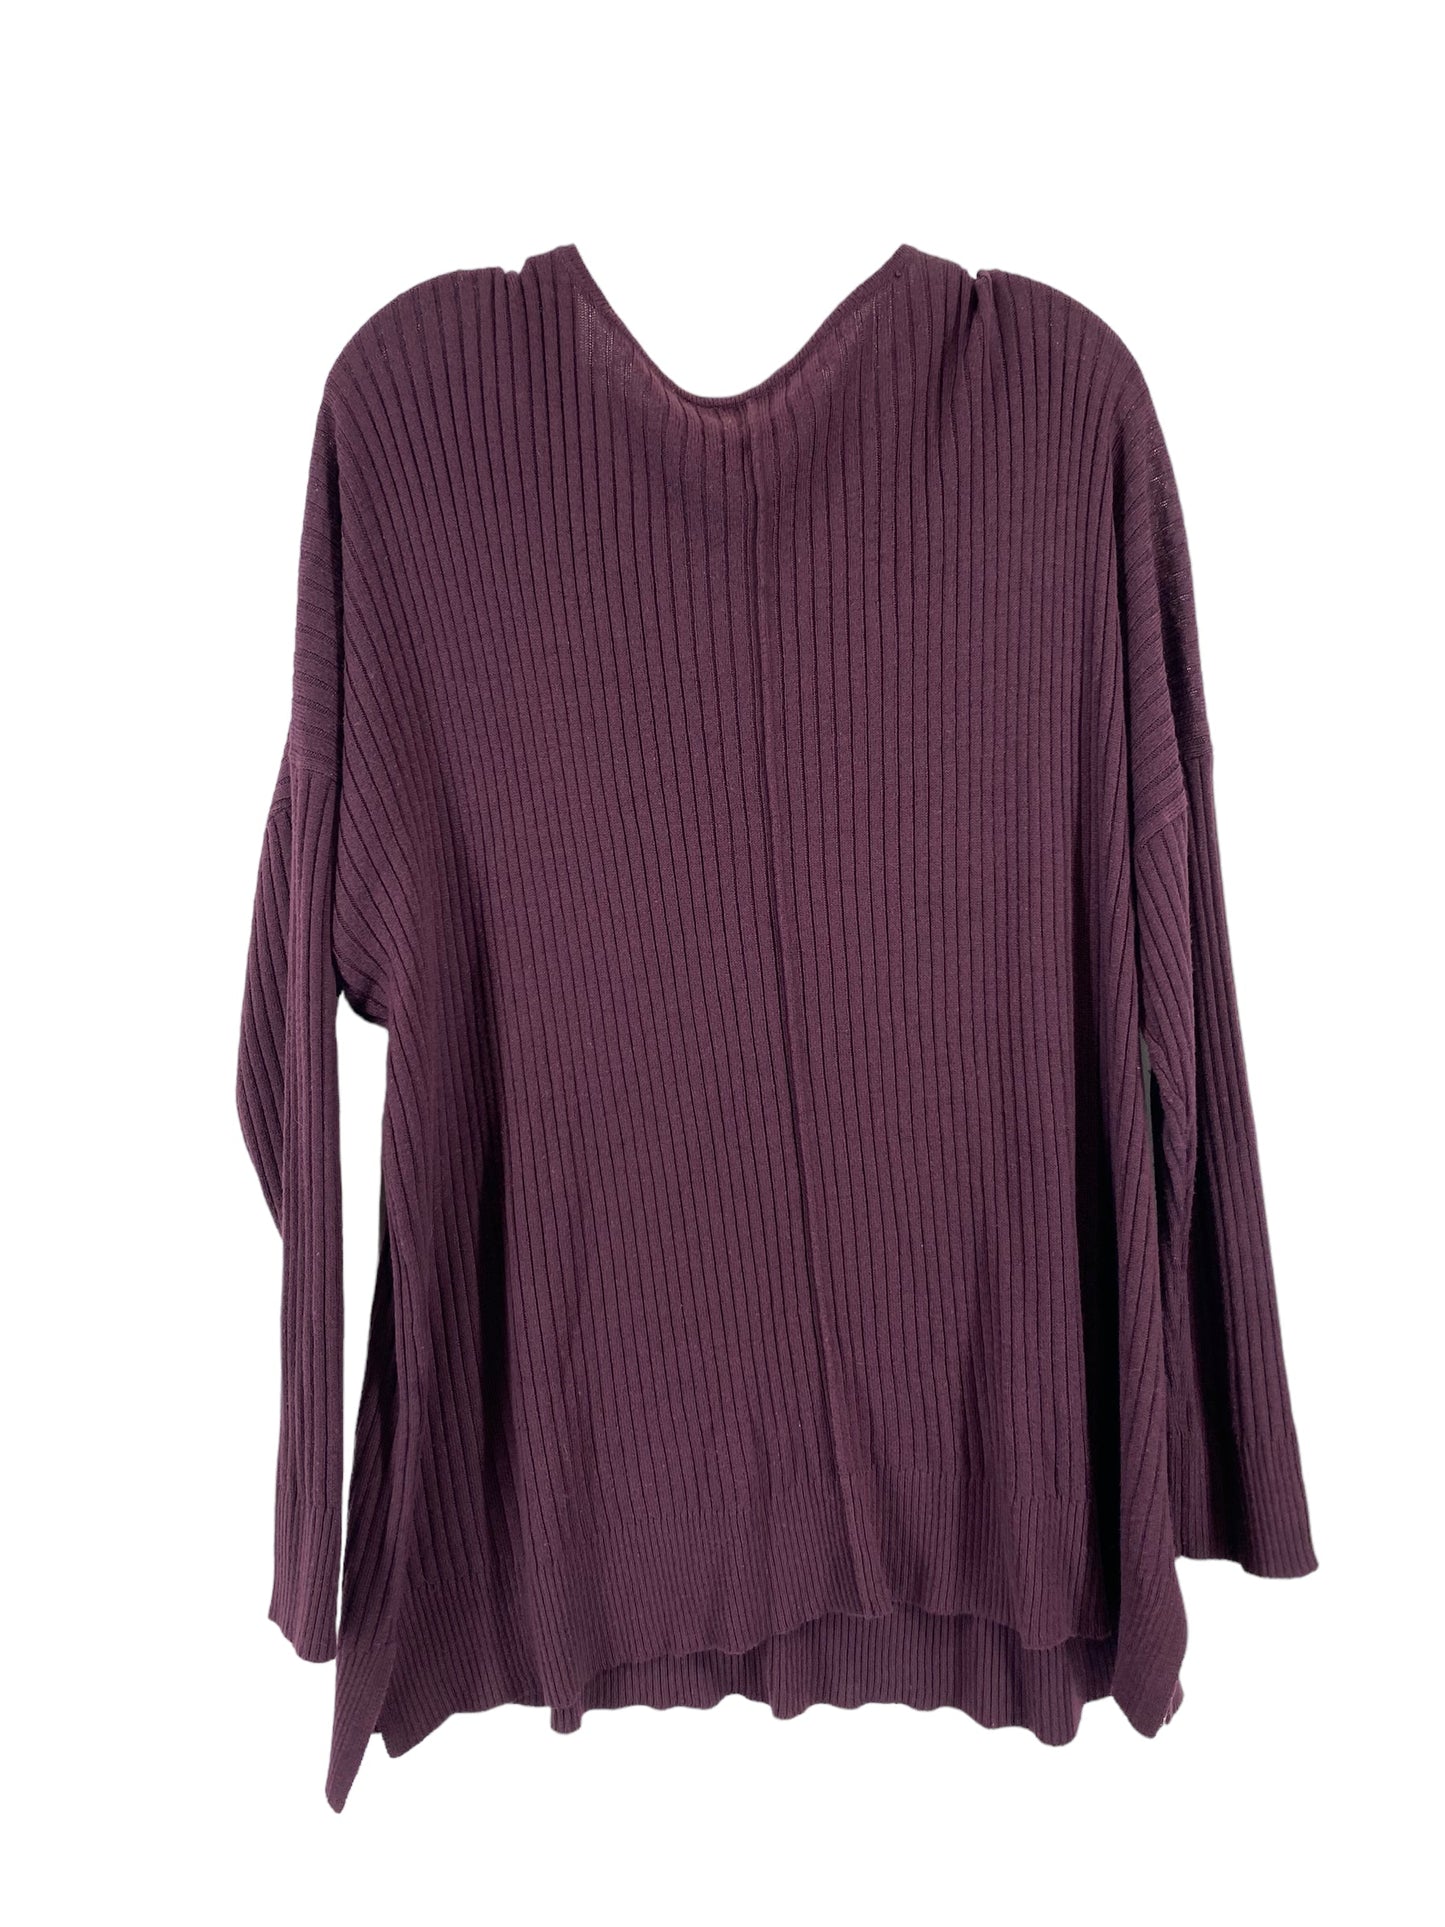 Top Long Sleeve By Rd Style  Size: 2x